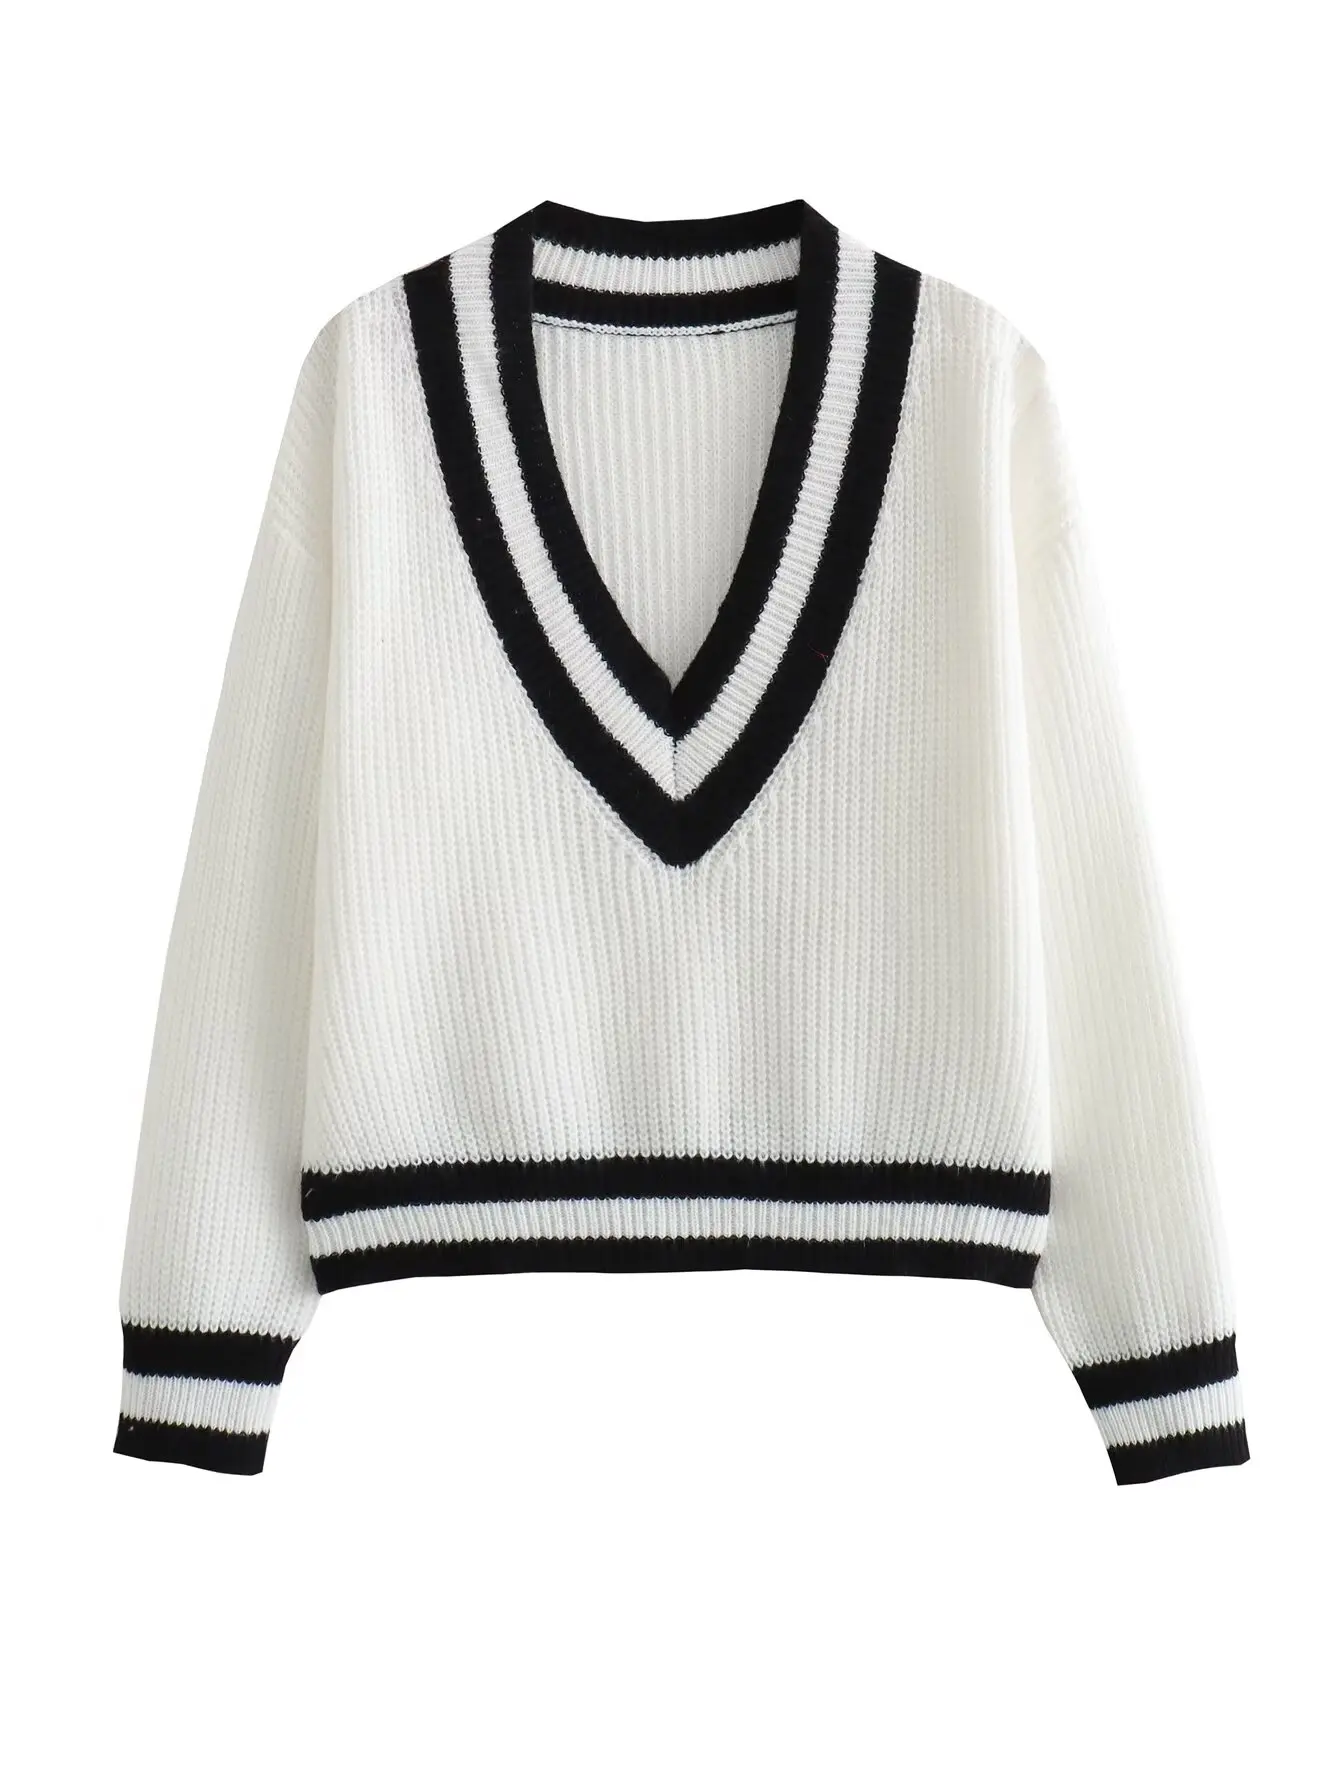 

Plus Size Women's Clothing Sweater Long Sleeve V-Neck Preppy Pullover Loose Knitted Sweater With Black Stripes Bust In 106-116CM